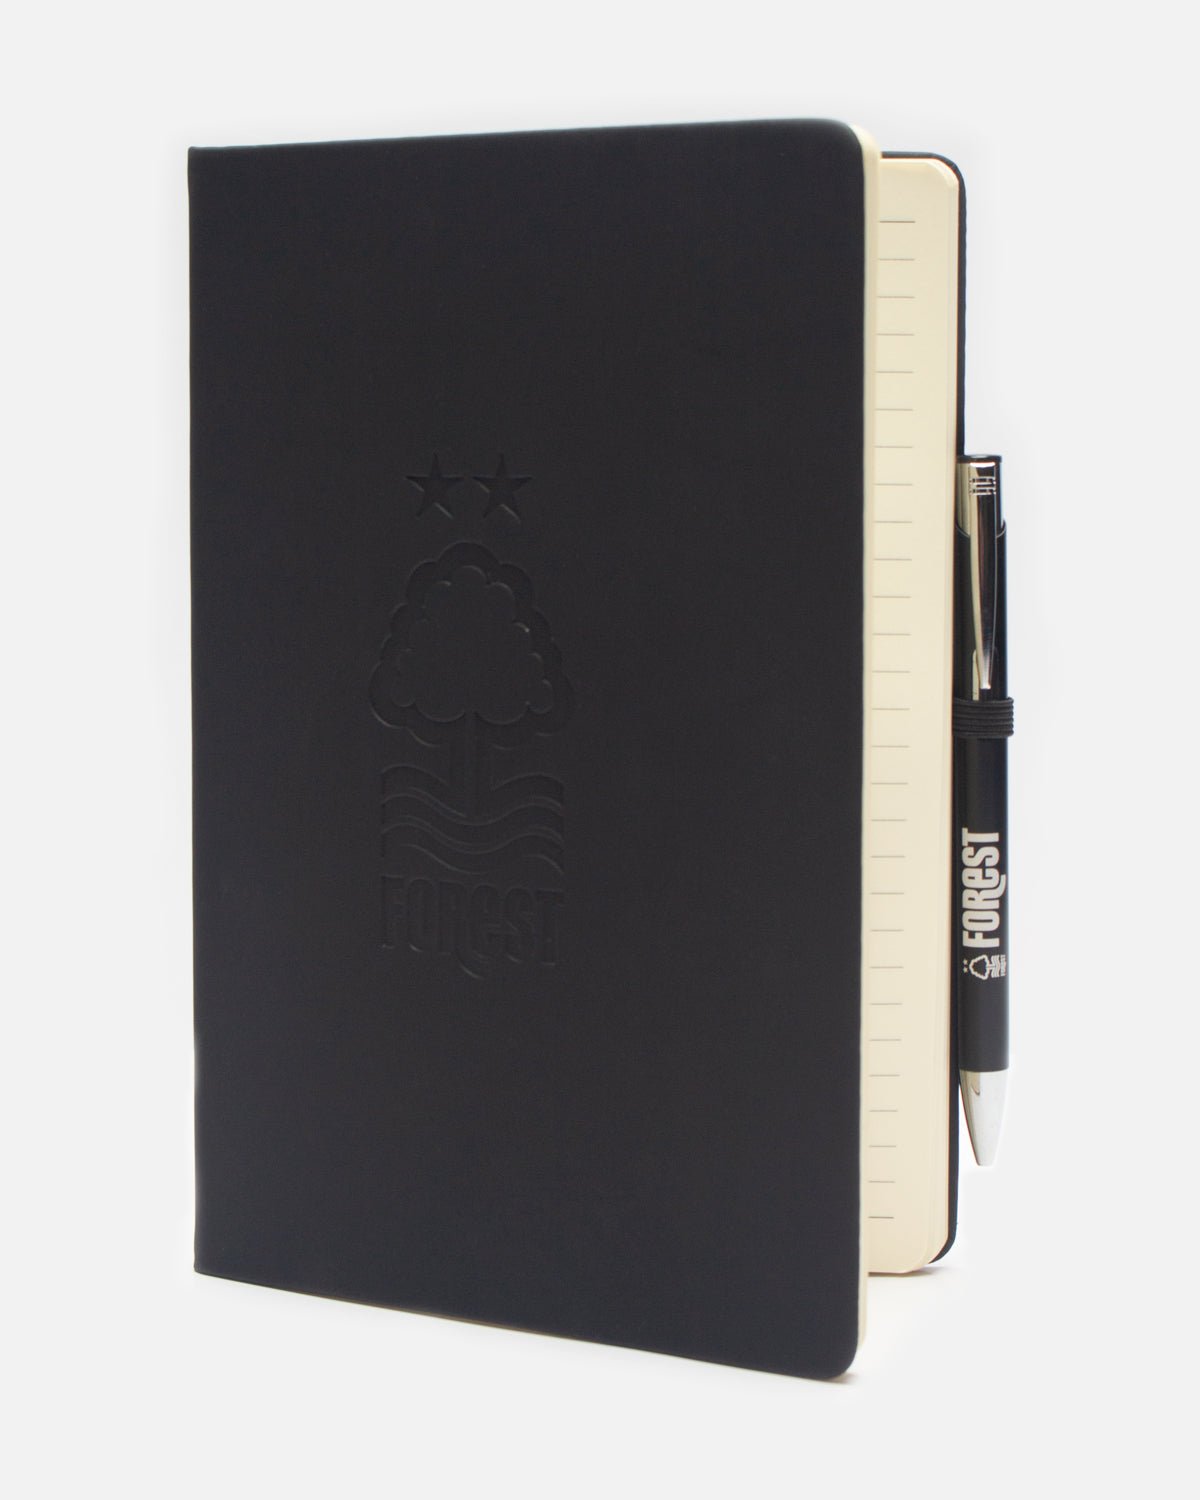 NFFC Black Notebook and Pen - Nottingham Forest FC